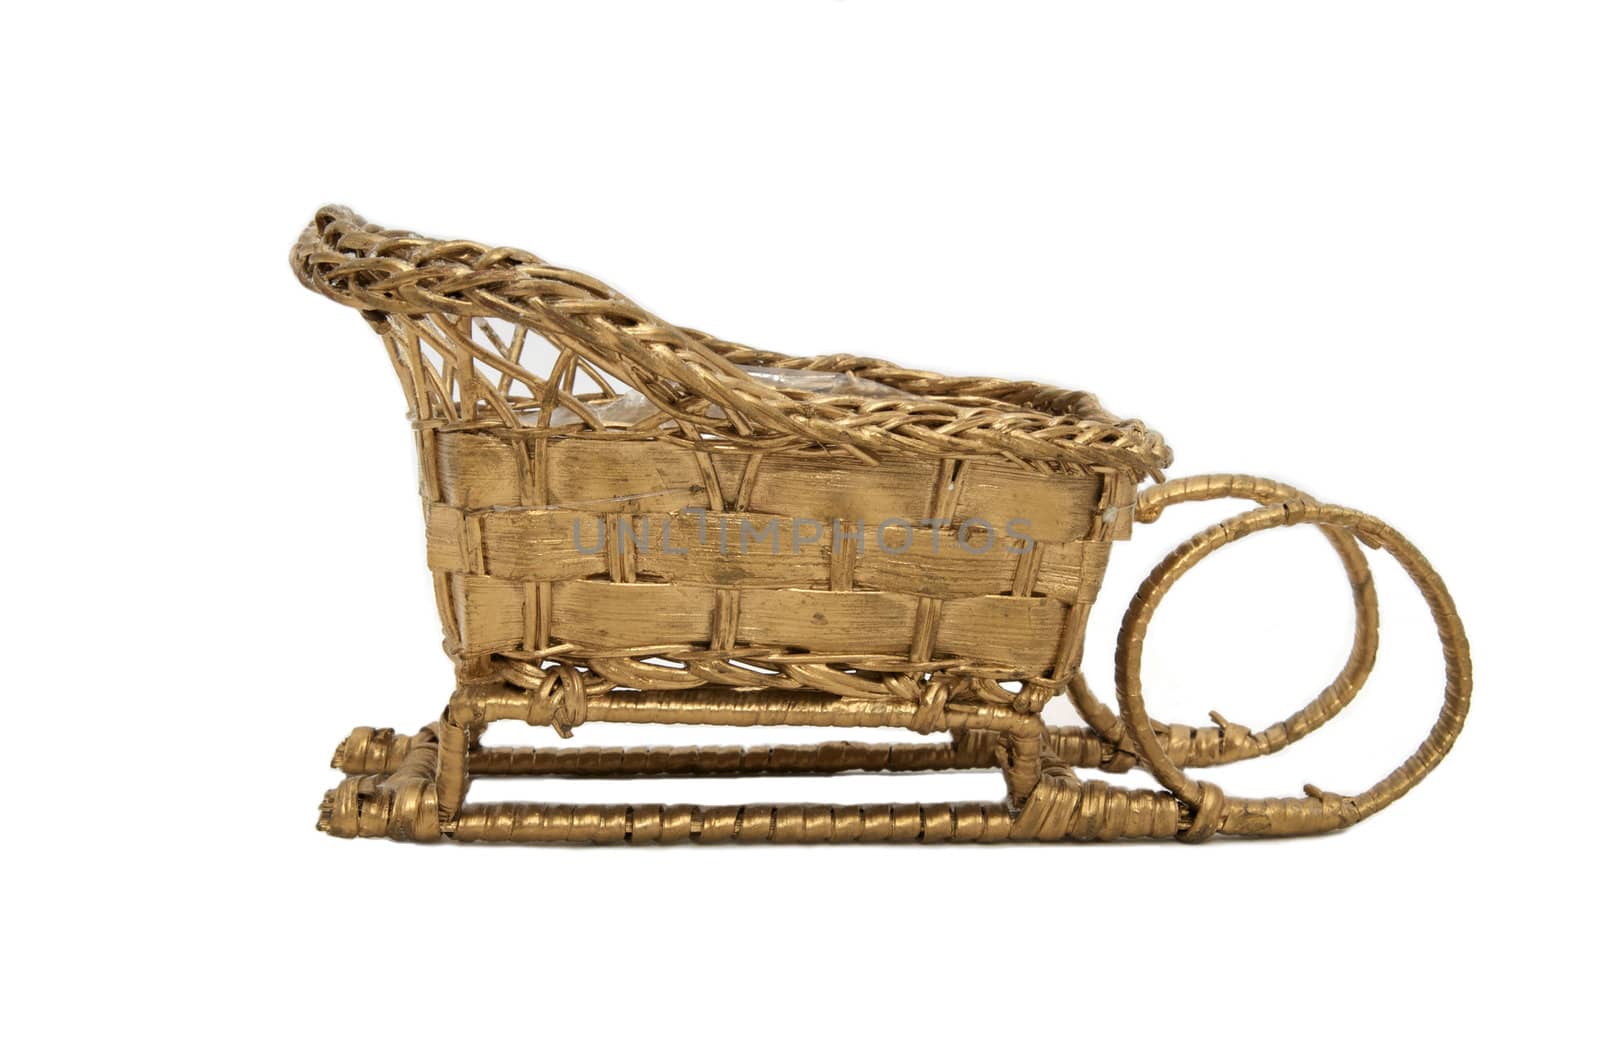 wicker sleigh by Lester120